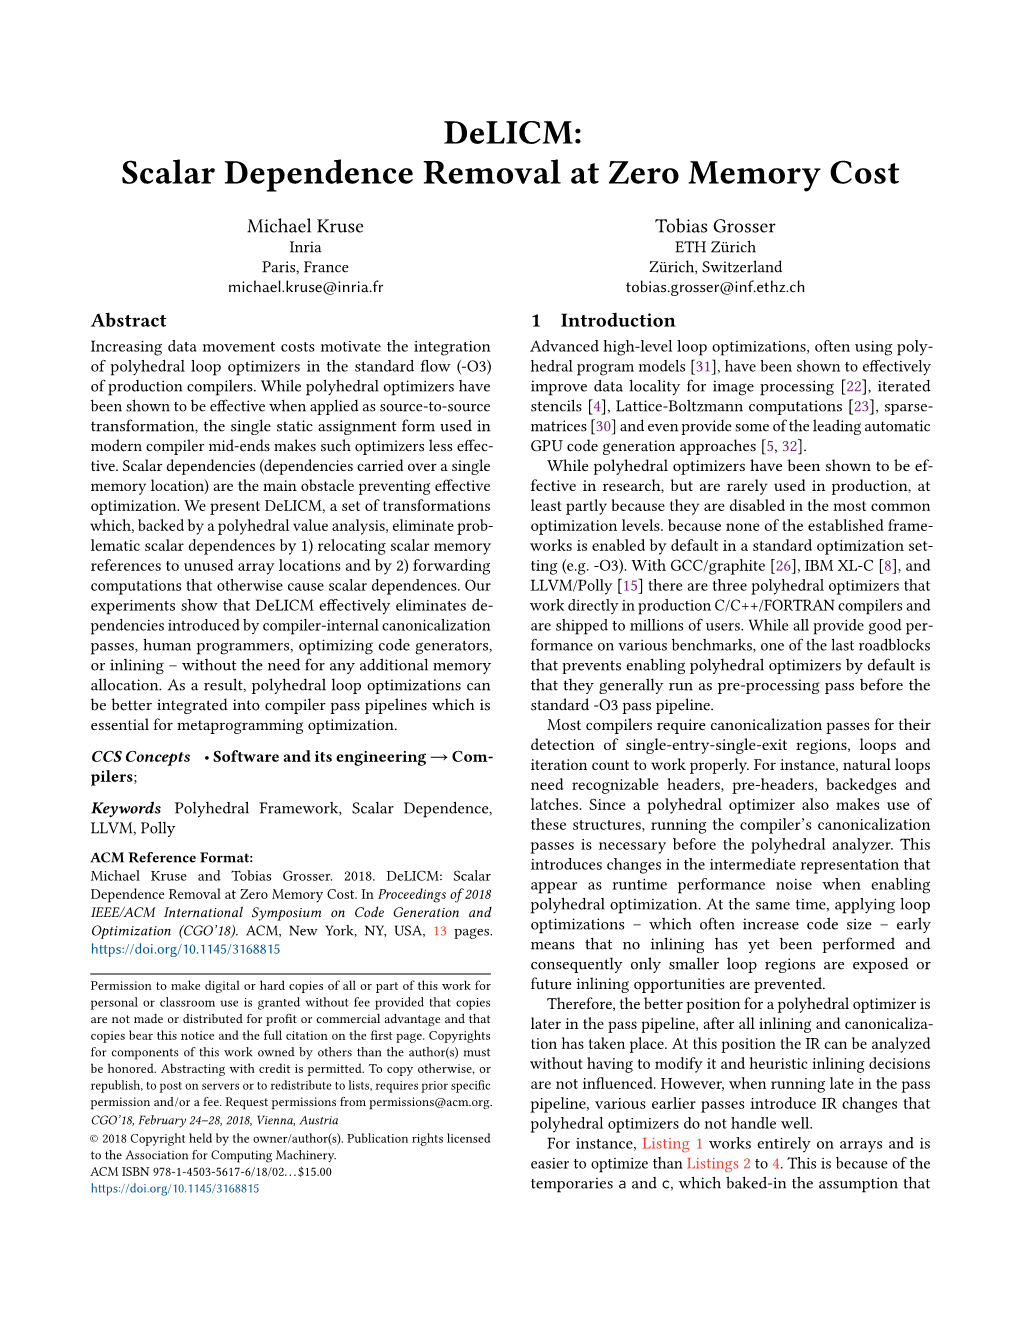 Delicm: Scalar Dependence Removal at Zero Memory Cost